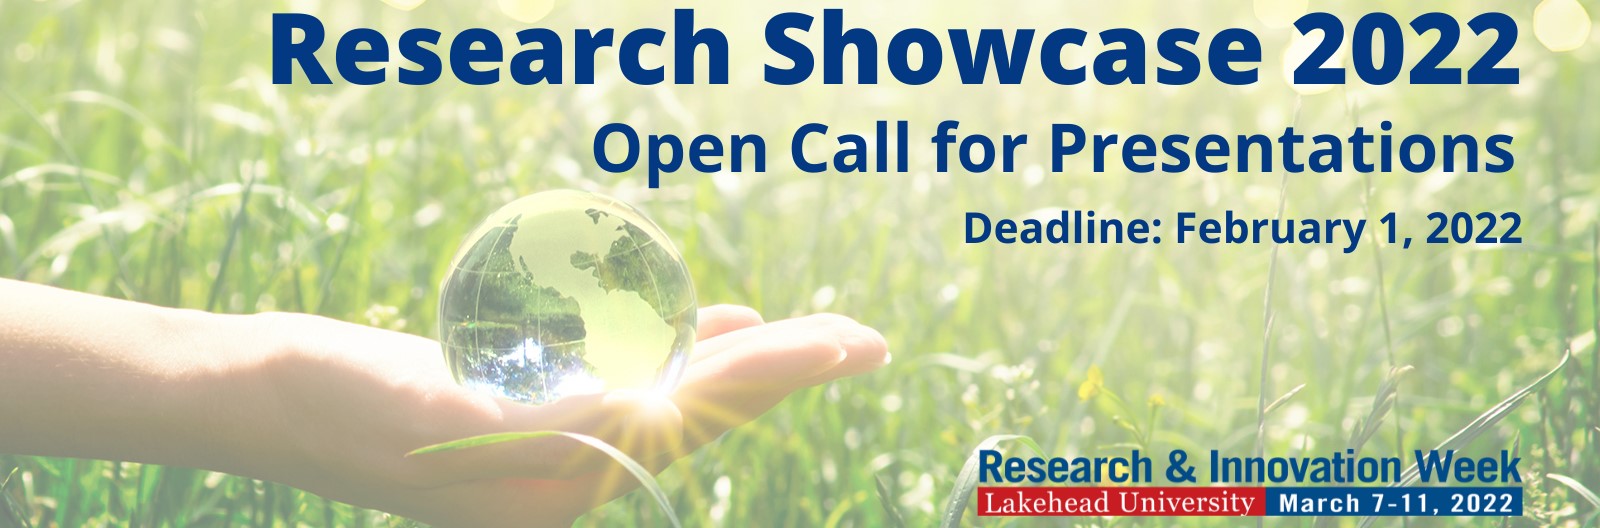 Poster advertising Research Showcase 2022:  Open Call for Presentations - Deadline: February 1, 2022